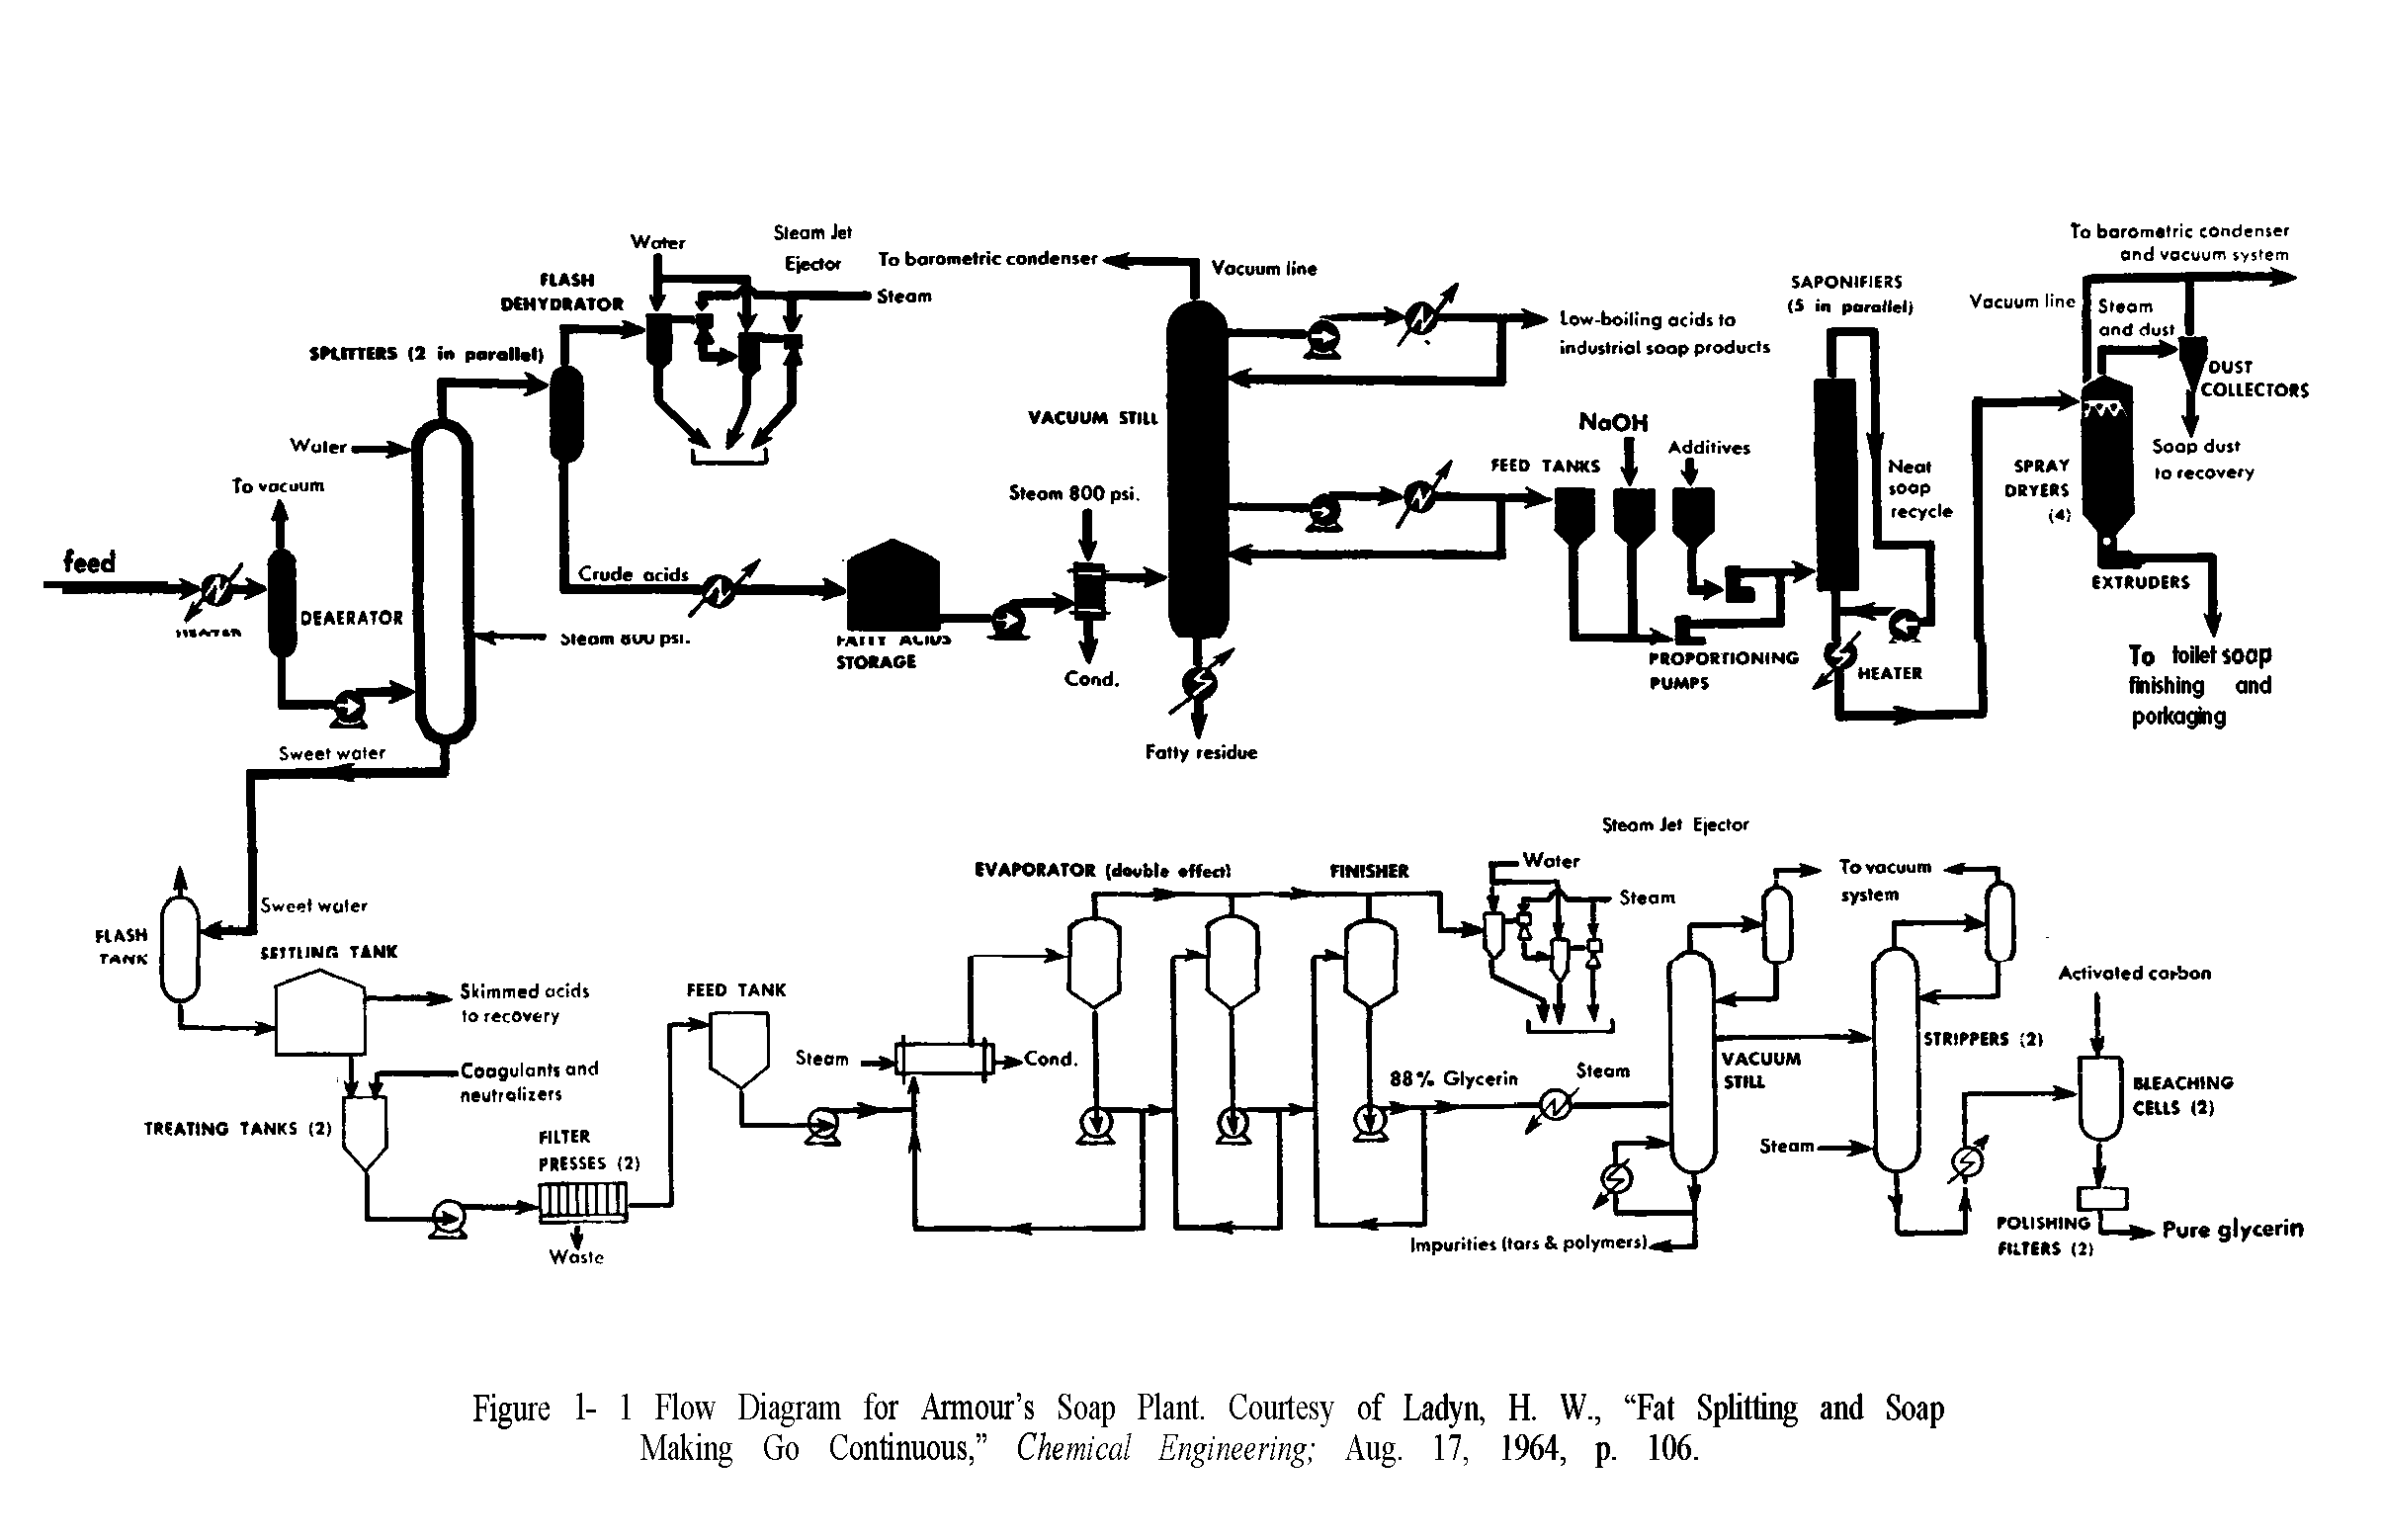 Figure 1- 1 Flow Diagram for Armour s Soap Plant. Courtesy of Ladyn, H. W., Fat Splitting and Soap Making Go Continuous, Chemical Engineering Aug. 17, 1964, p. 106.